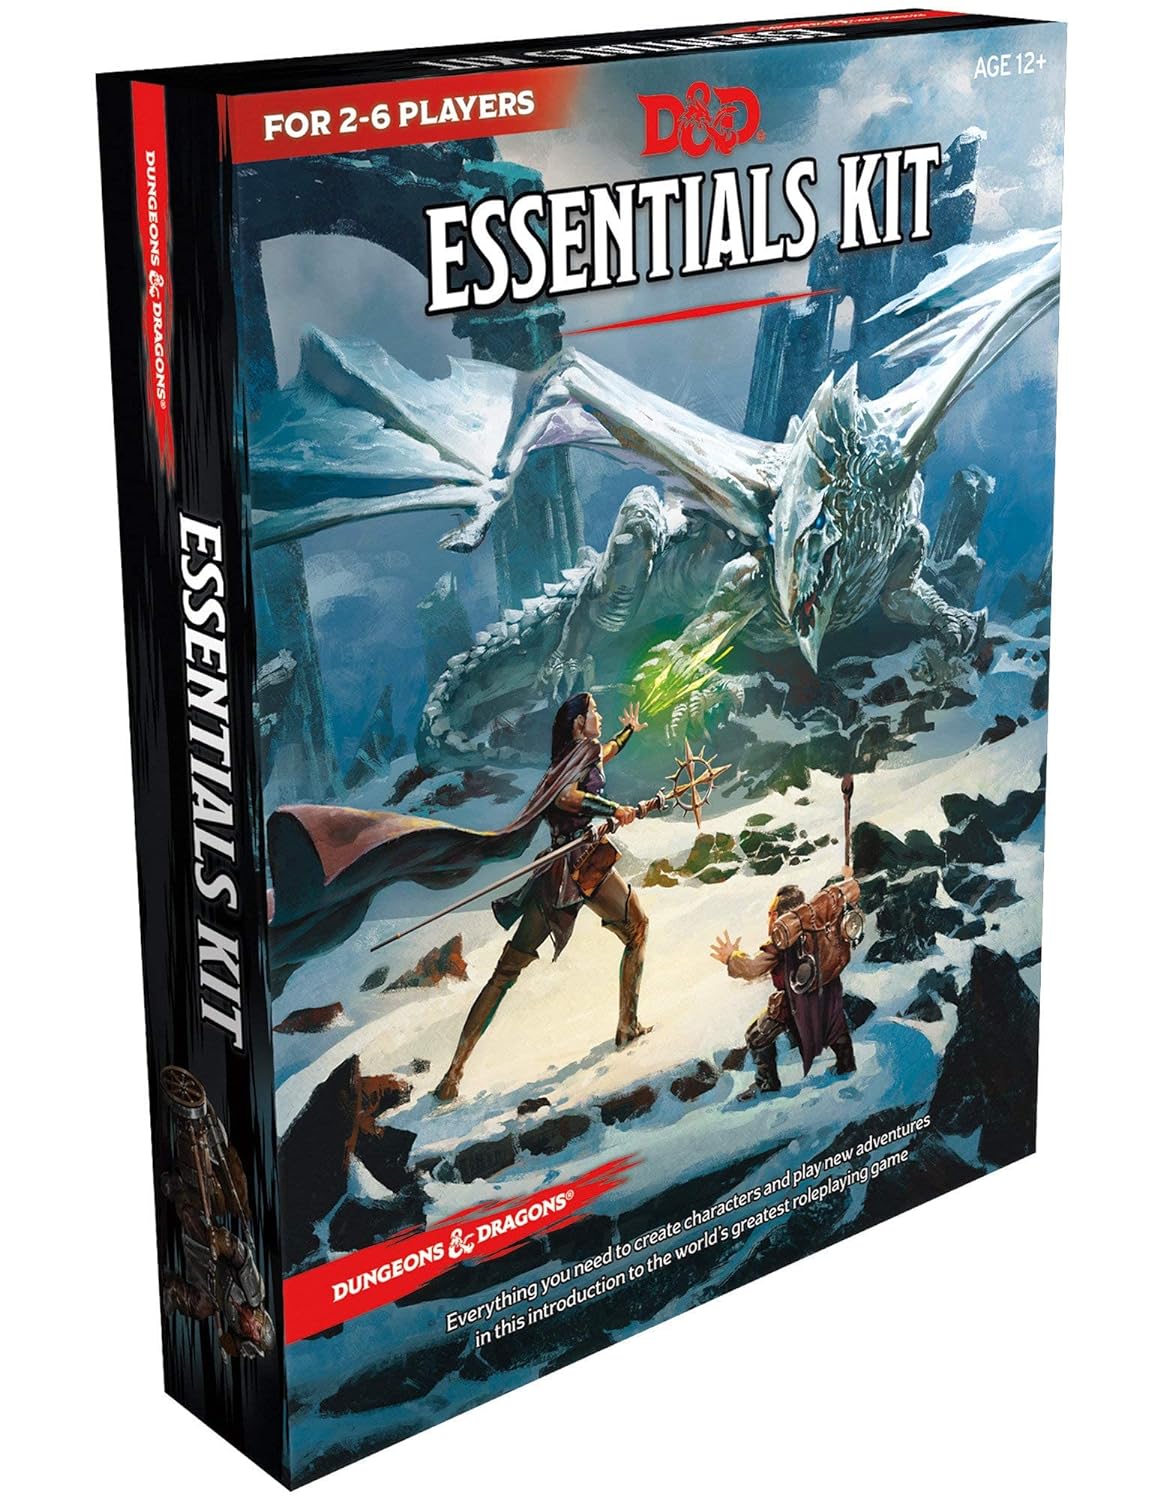 D&D Essentials Kit (Dungeons&Dragons Intro Adventure Set) Age Range:12 Years&Up